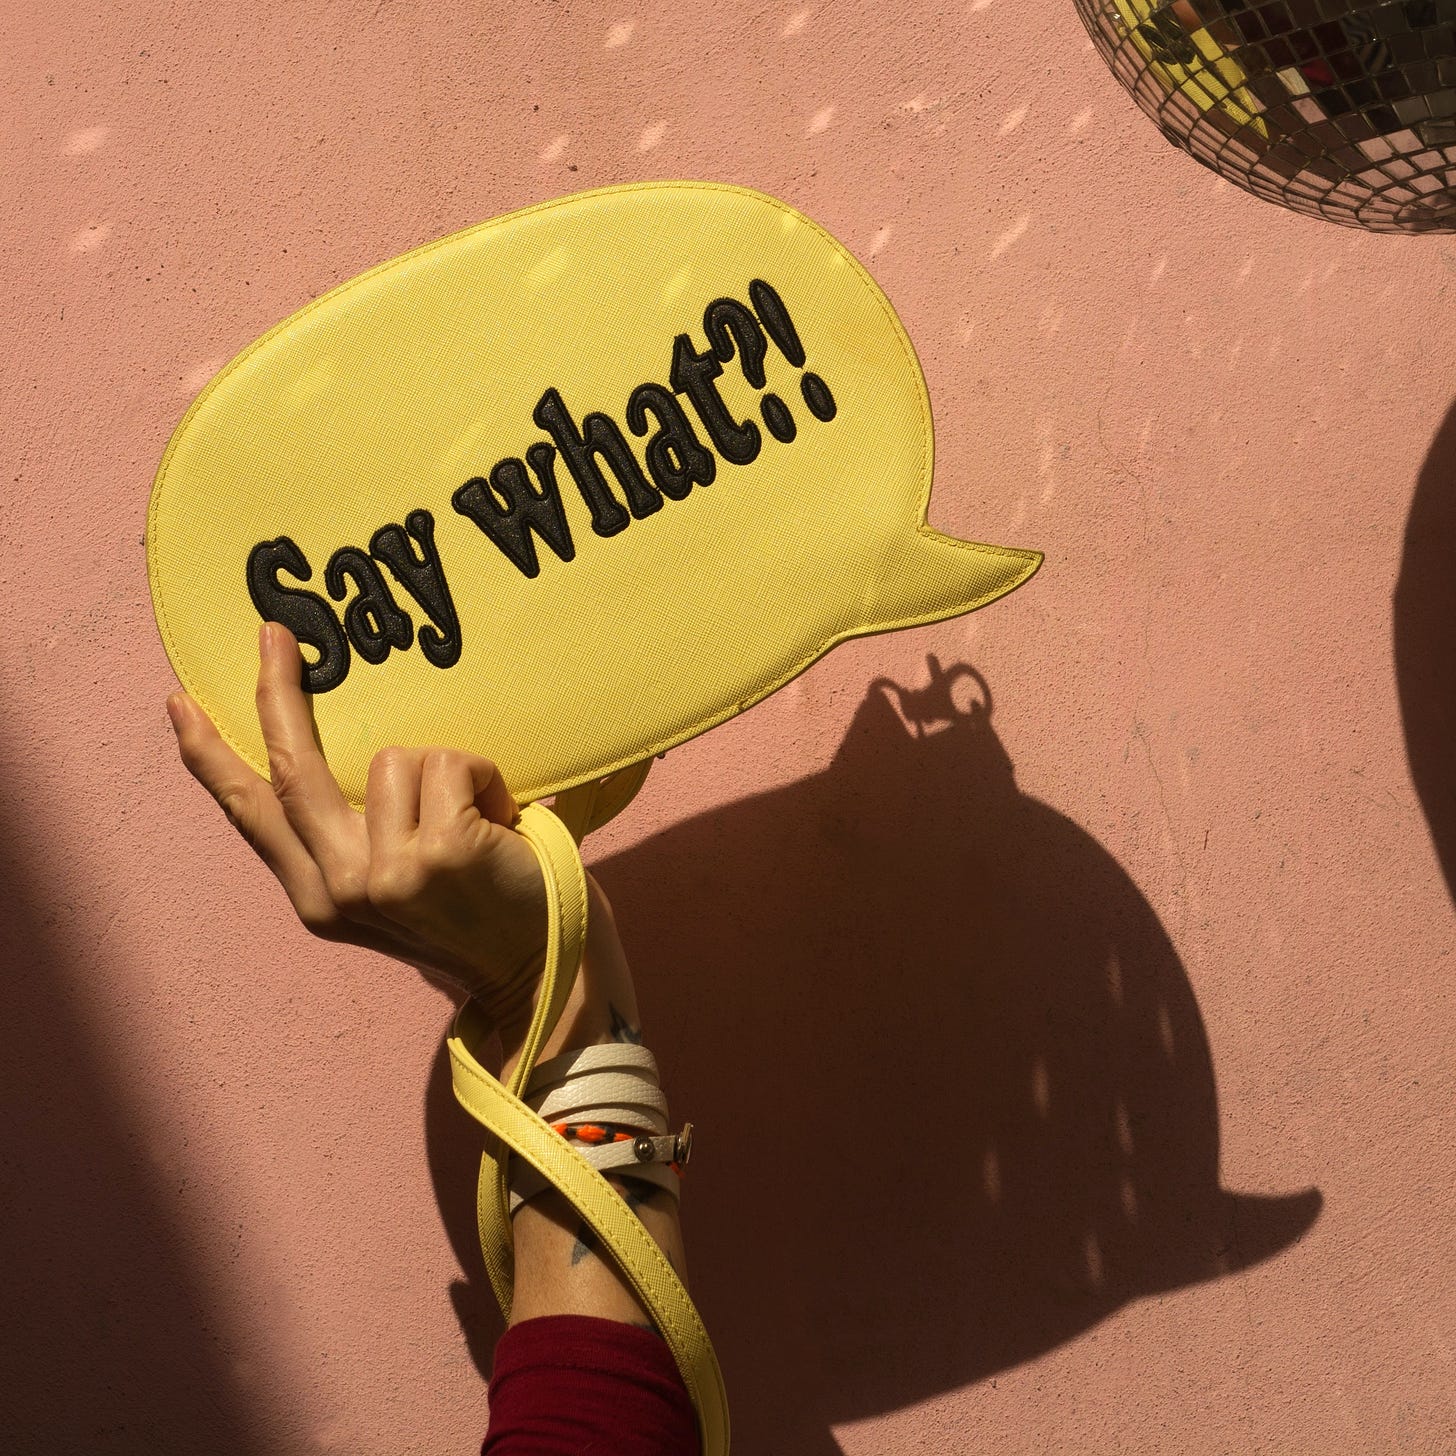 a brown hand holds up a gold bubble with the word "Say what?!" in it over their head